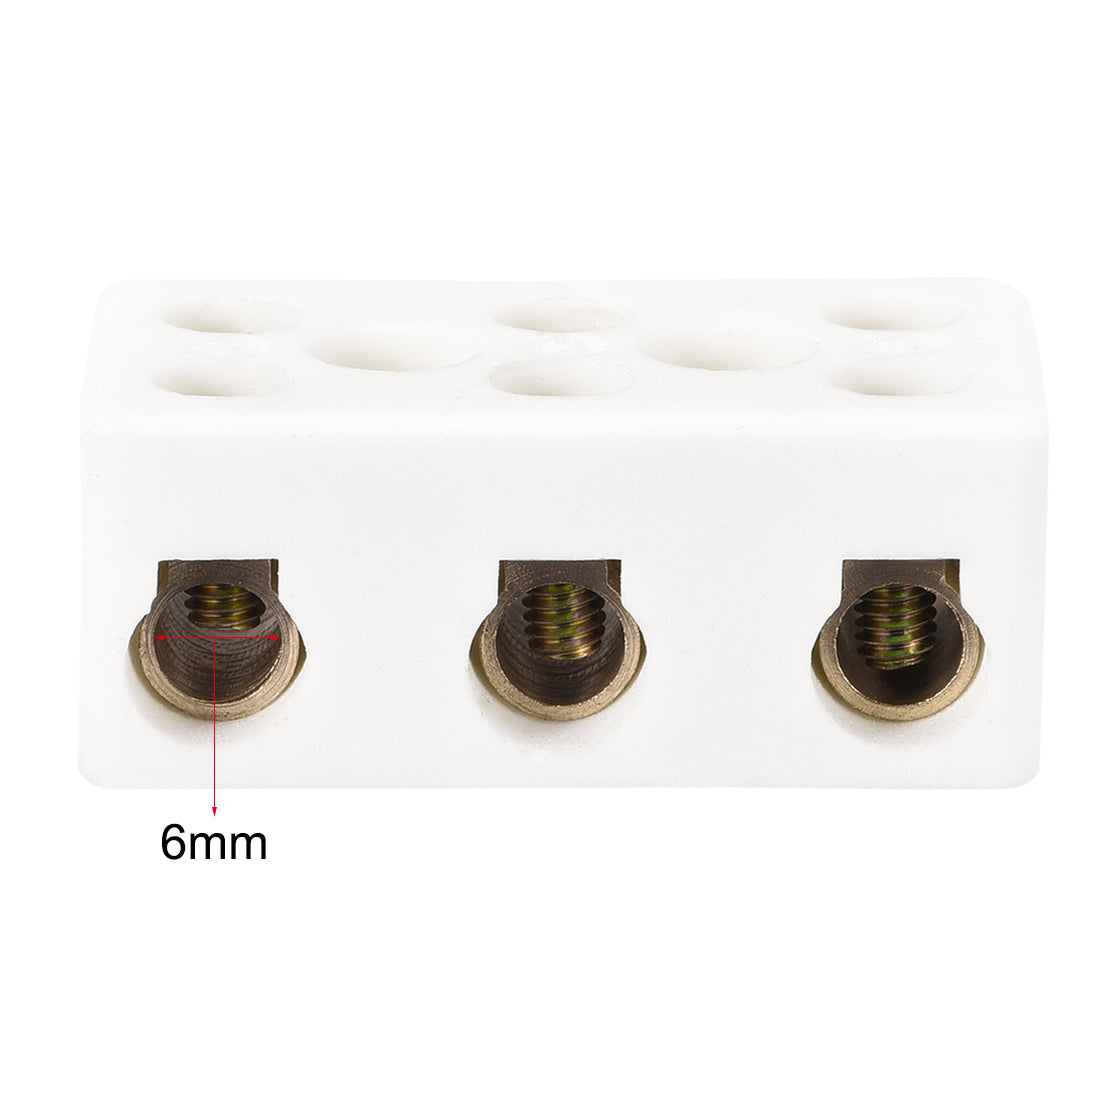 uxcell Uxcell 3 Way Ceramics Terminal Blocks High Temp Porcelain Ceramic Connectors 47x27.5x19.5mm for Electrical Wire Cable